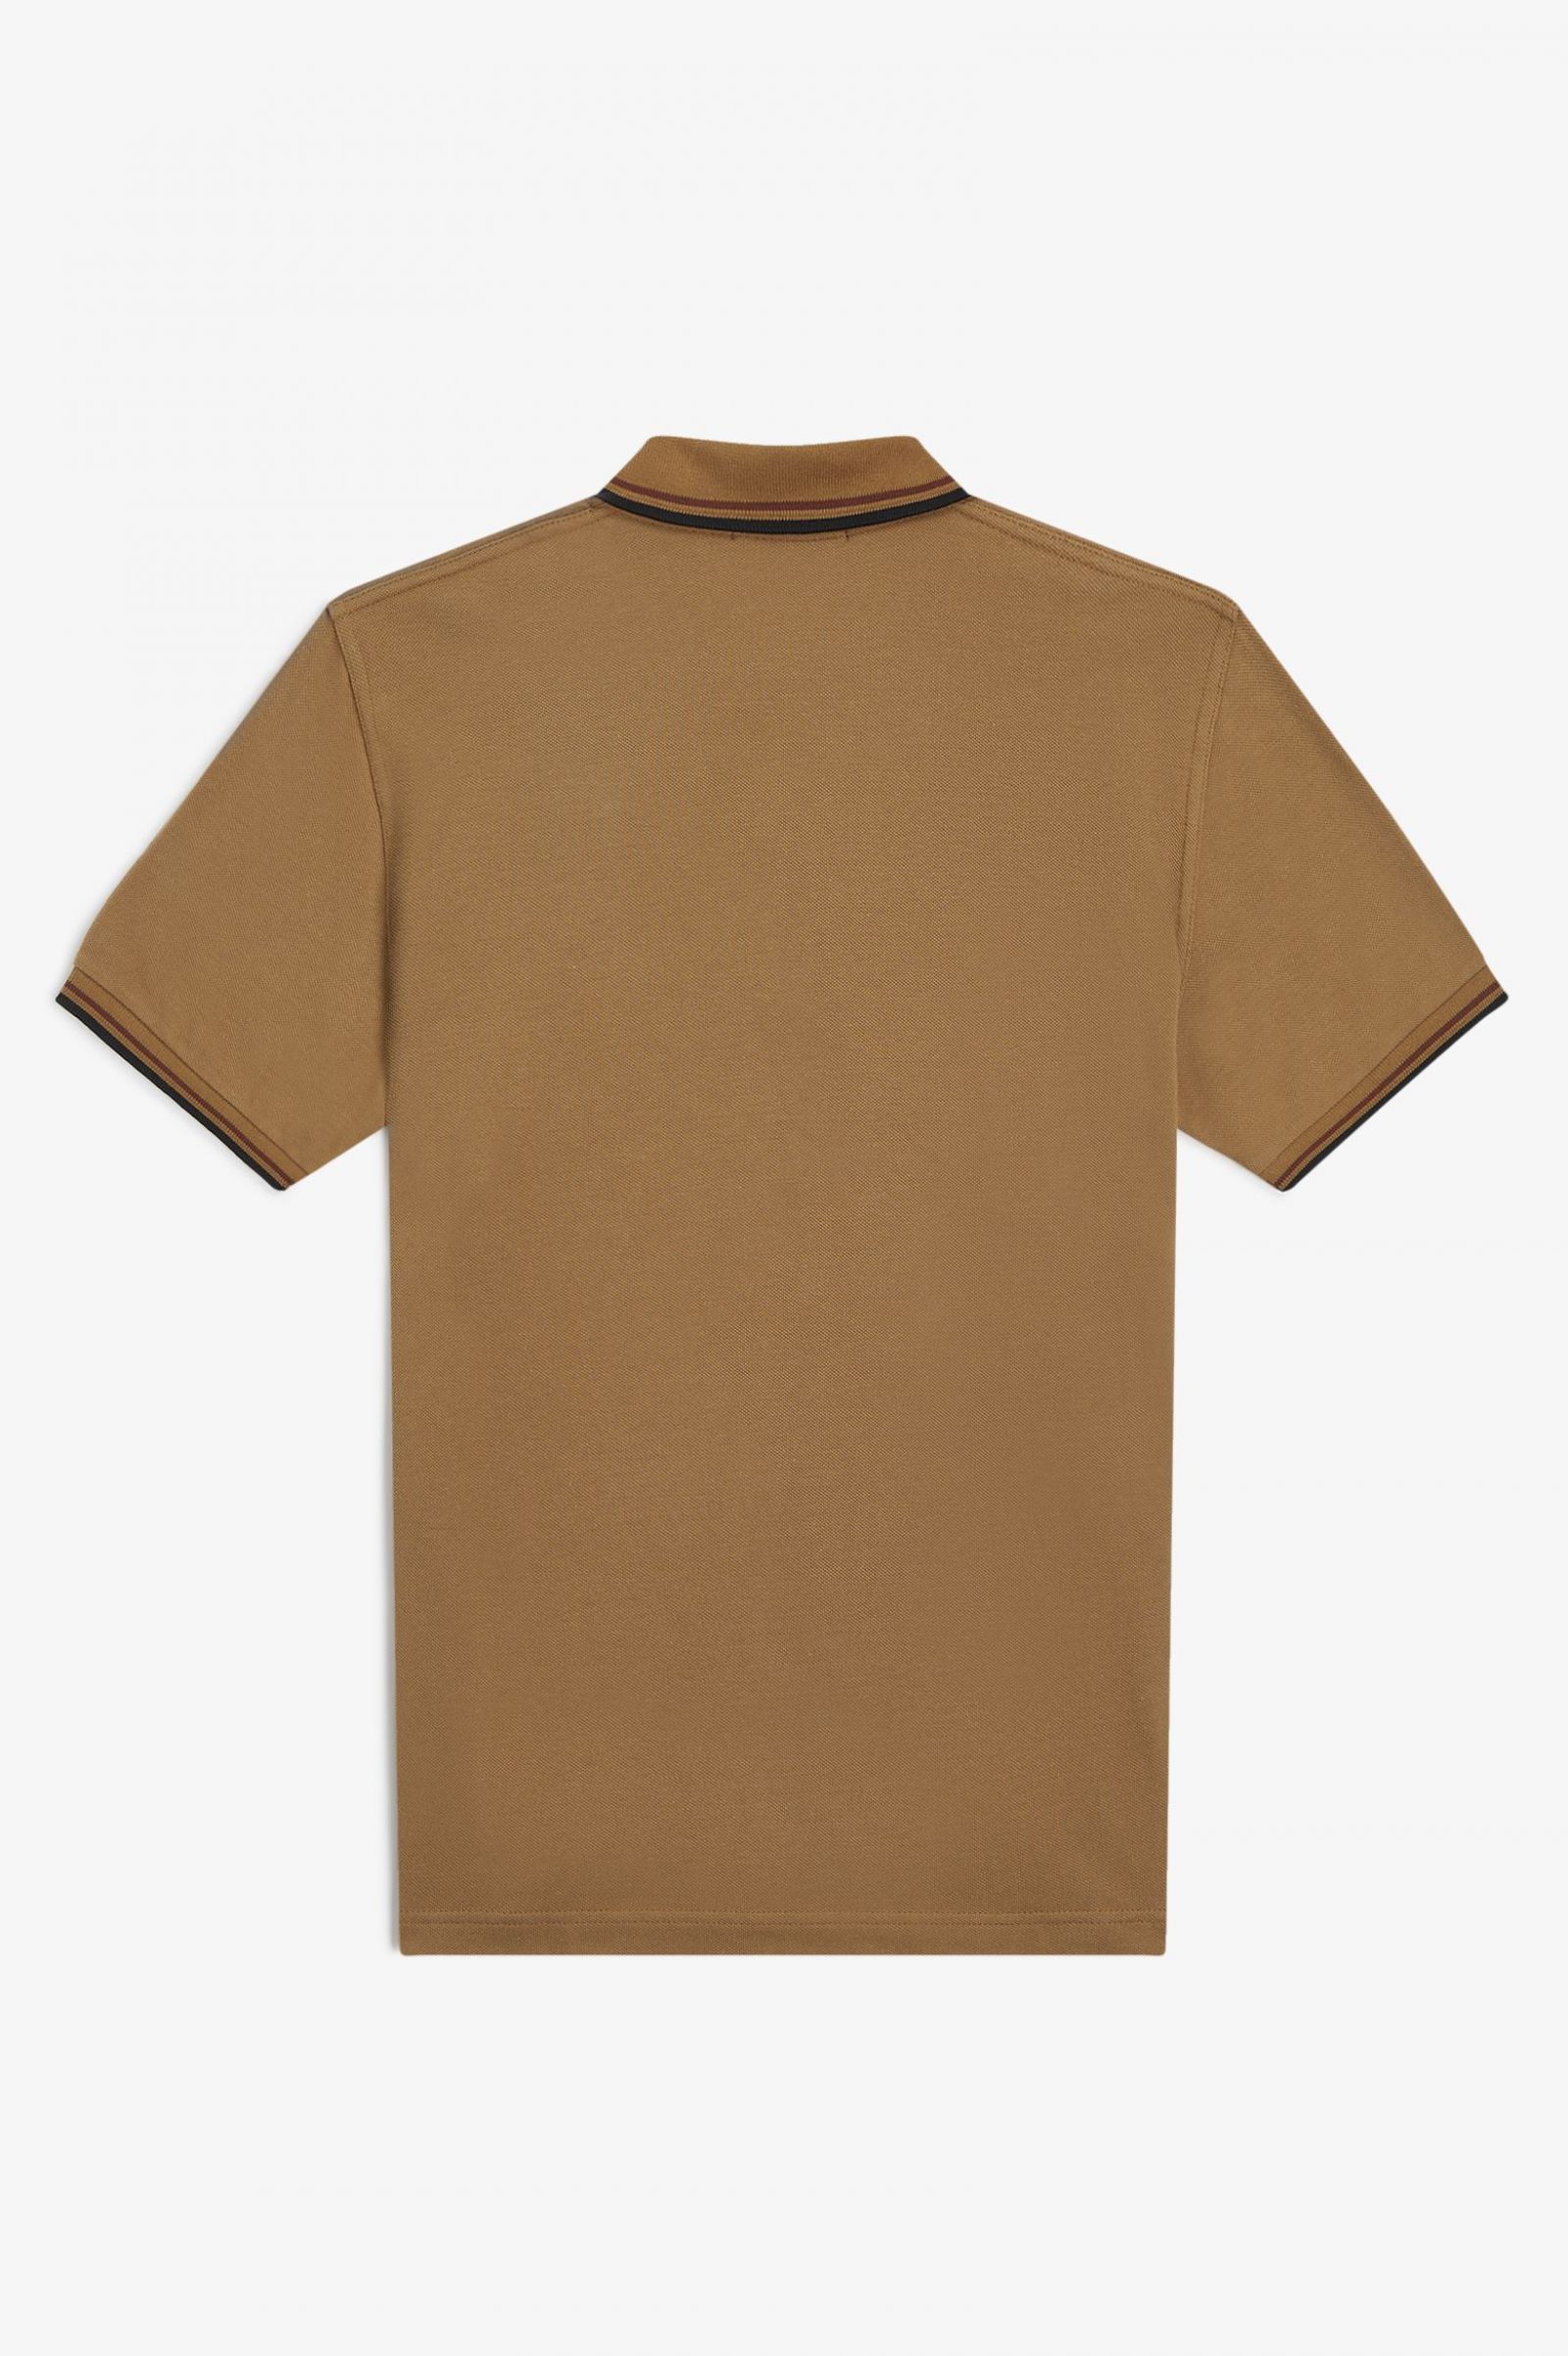 Fred Perry Twin Tipped Shirt in Dark Caramel